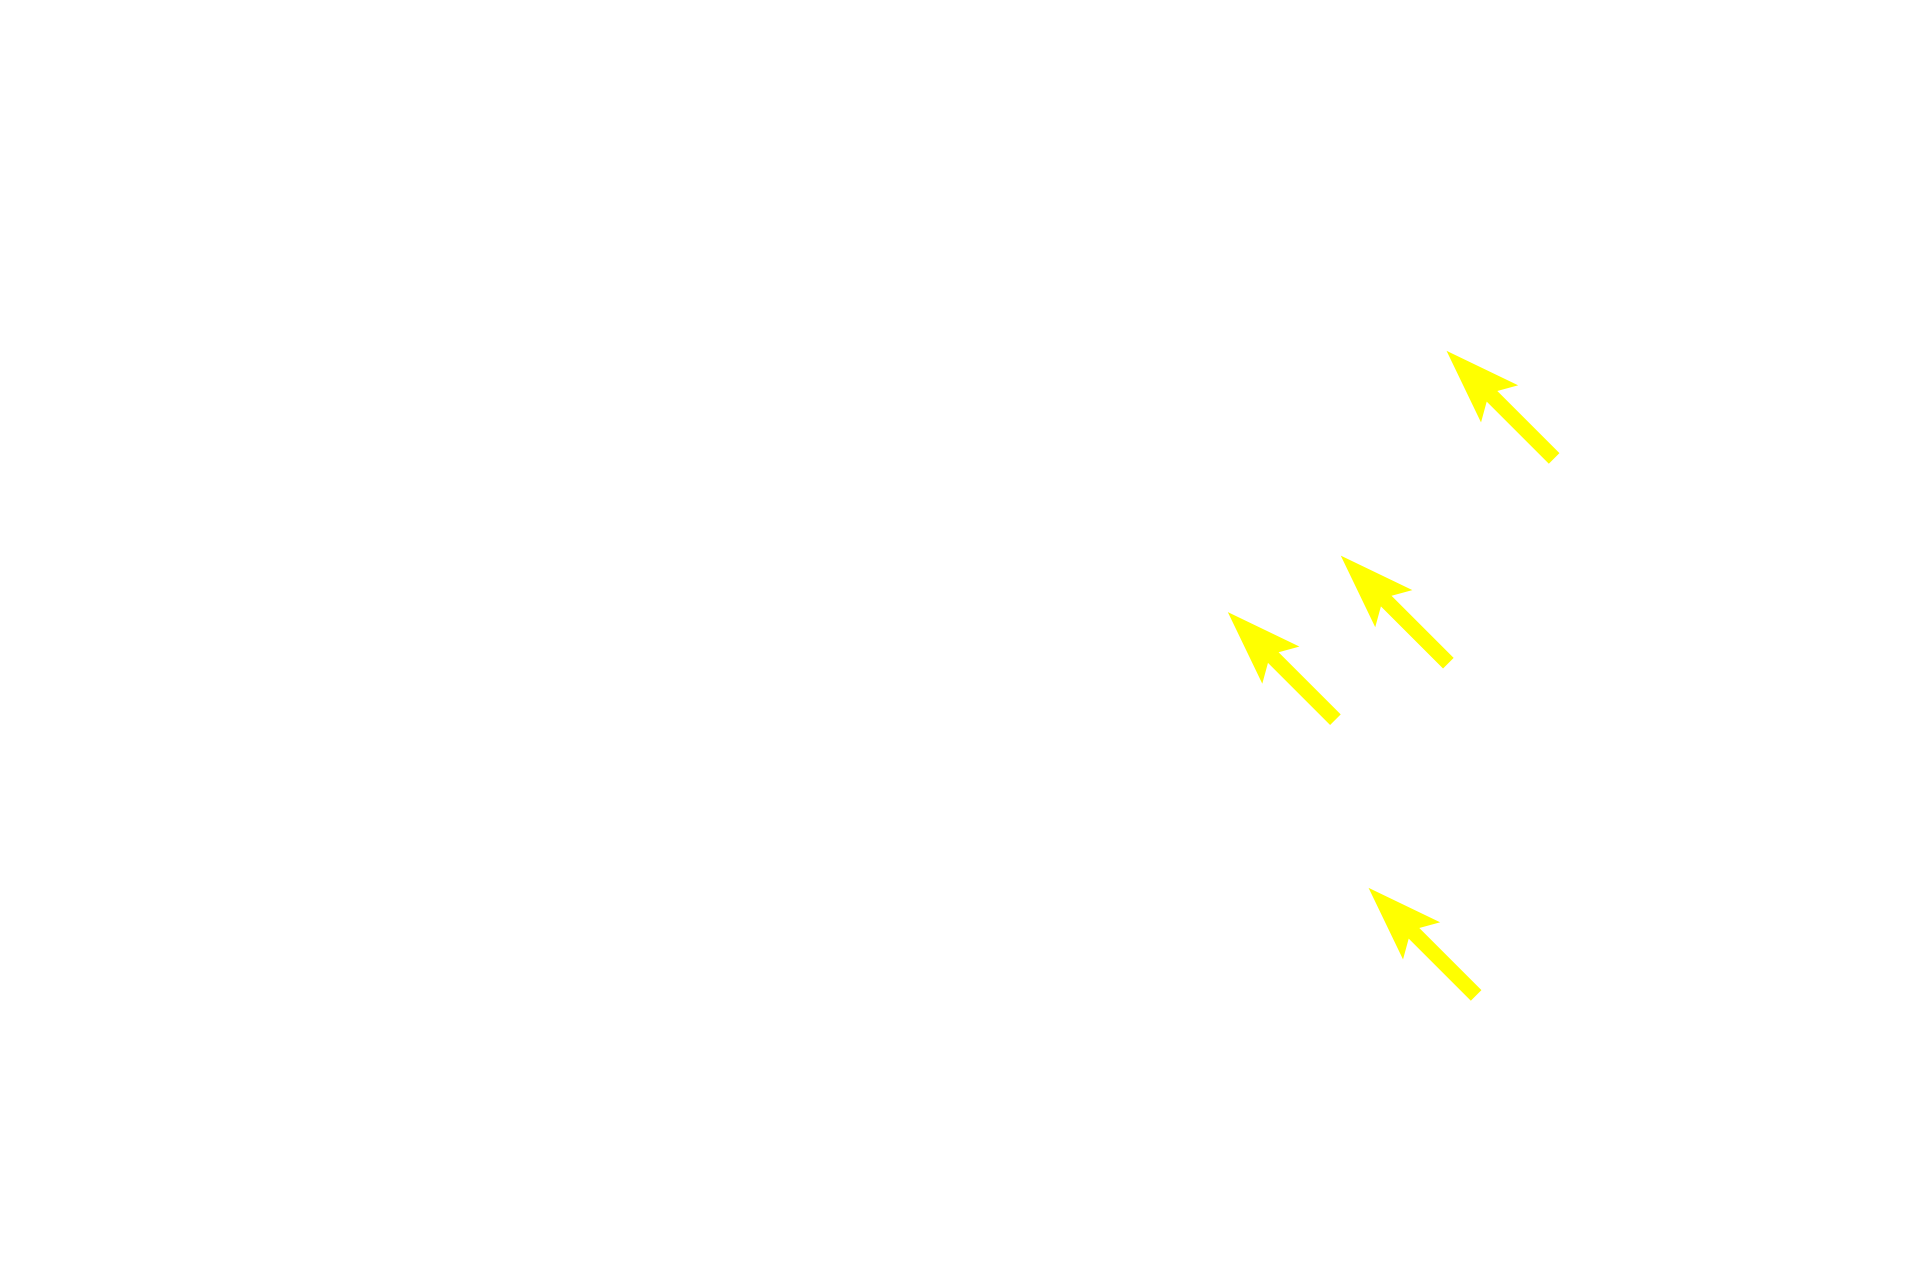 Dendrites <p>These multipolar neurons are located in an autonomic ganglion in the sympathetic division of the autonomic nervous system.  Sympathetic ganglia are generally located at some distance from the organs they innervate and contain large numbers of both incoming preganglionic axons as well as exiting, efferent postganglionic axons from the multipolar neurons.  The neuron cell bodies are widely dispersed and extend numerous dendrites.  Eccentrically-located nuclei are common. 100x, 1000x</p>
